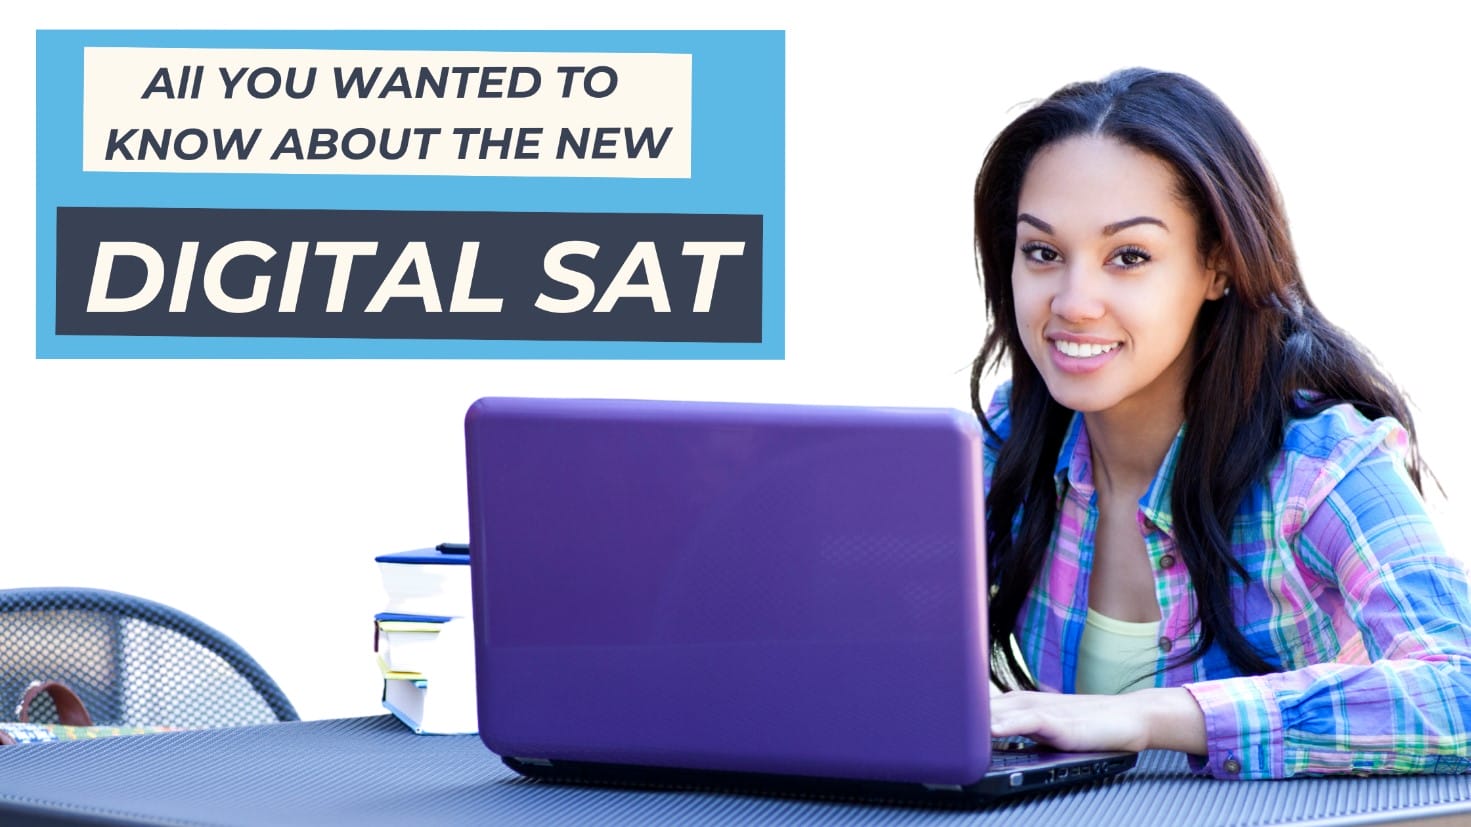 All YOU WANTED TO KNOW ABOUT THE DIGITAL SAT